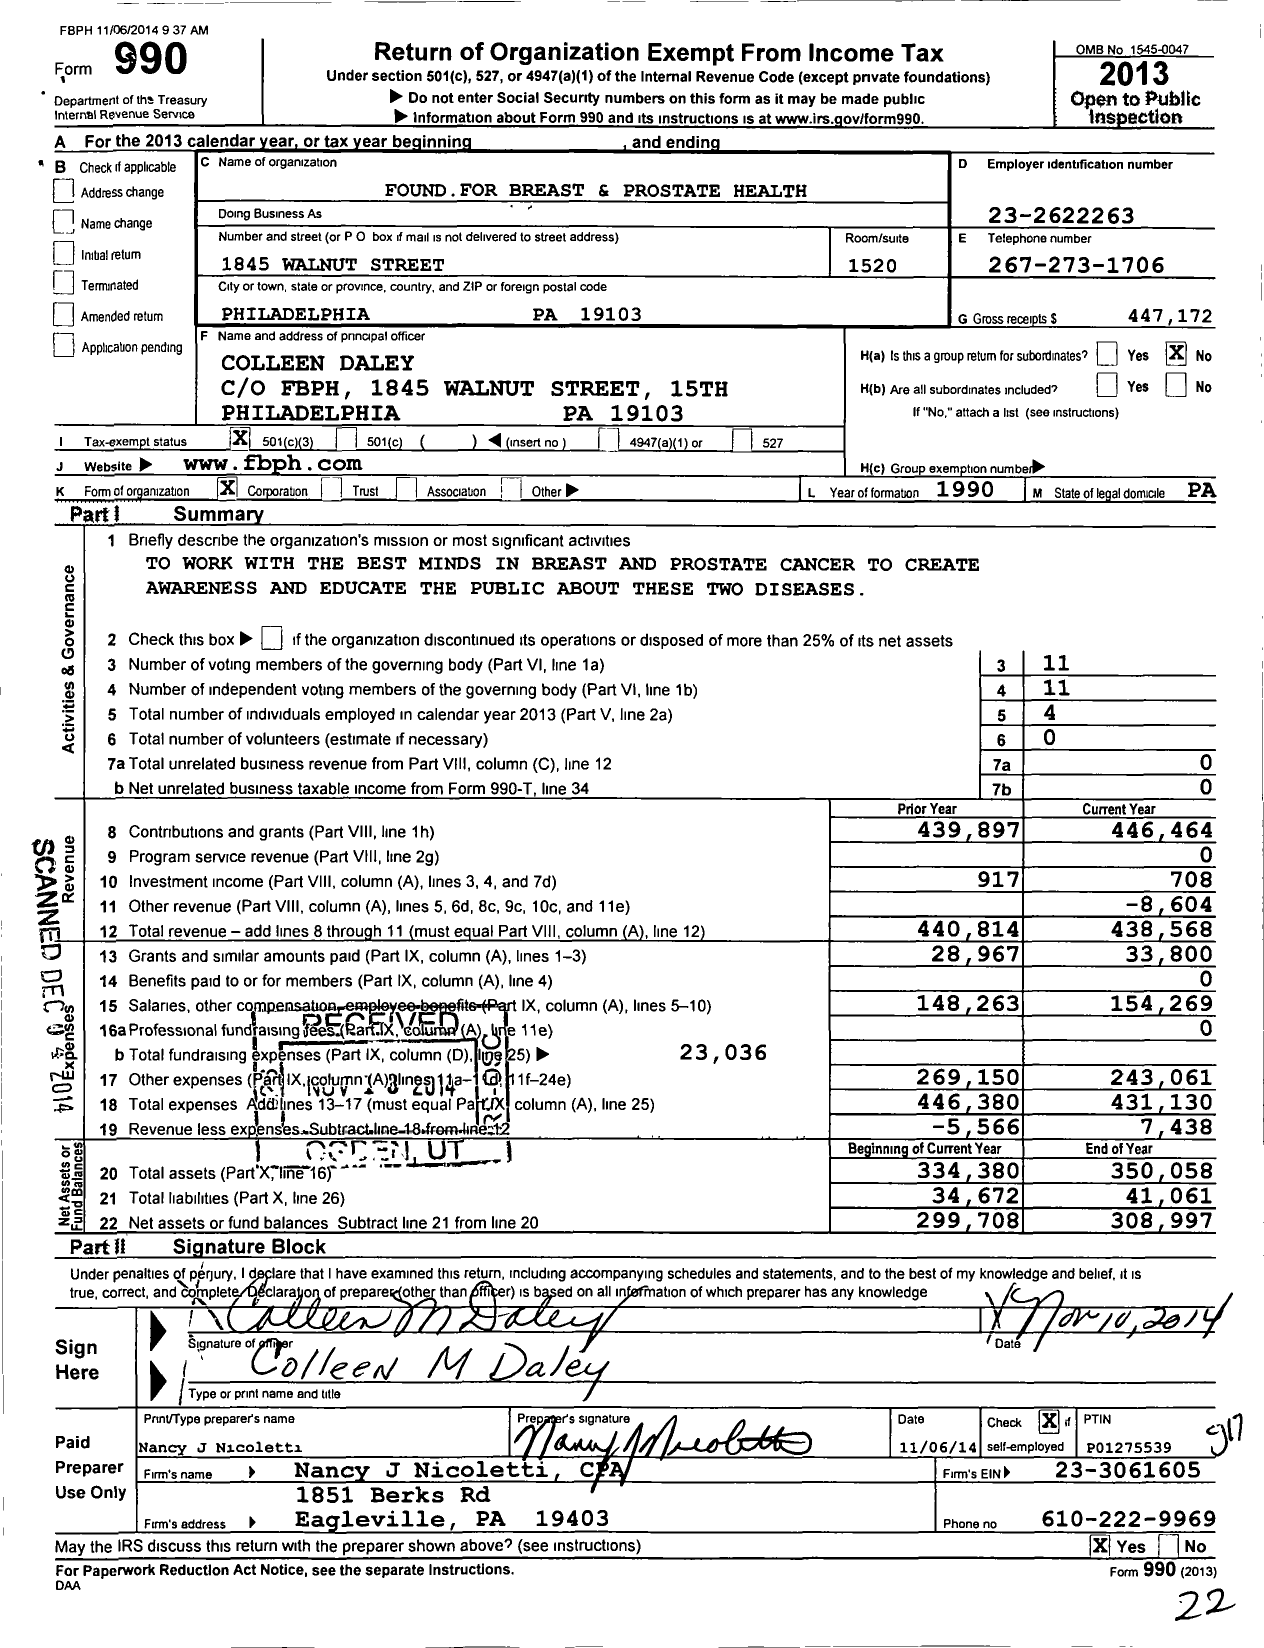 Image of first page of 2013 Form 990 for Found for Breast and Prostate Health